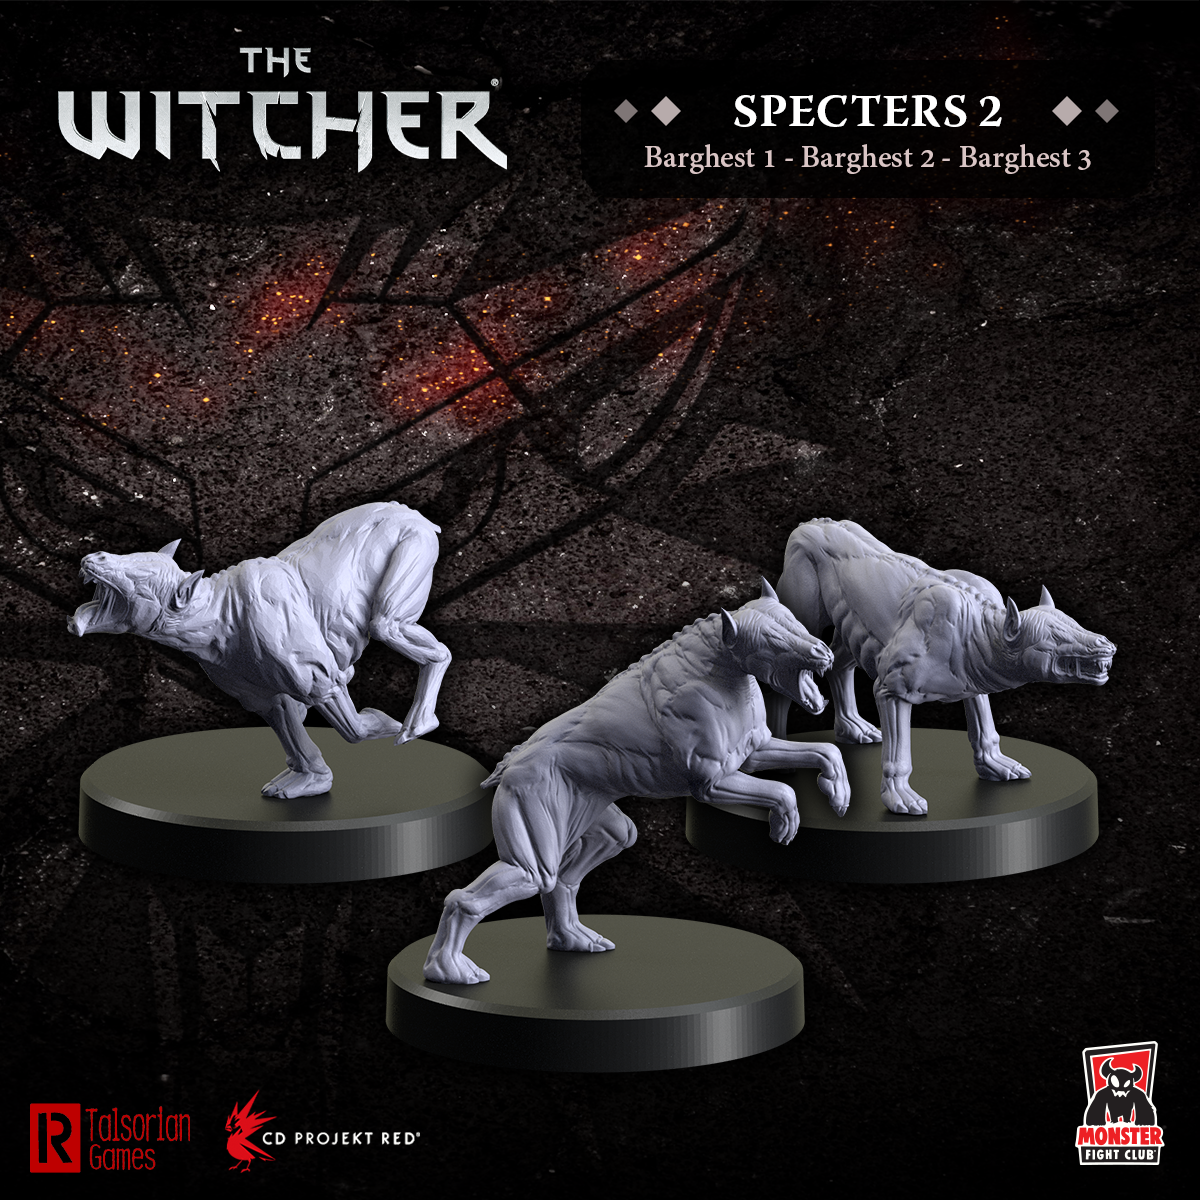 The Witcher - Specters 2: Barghests